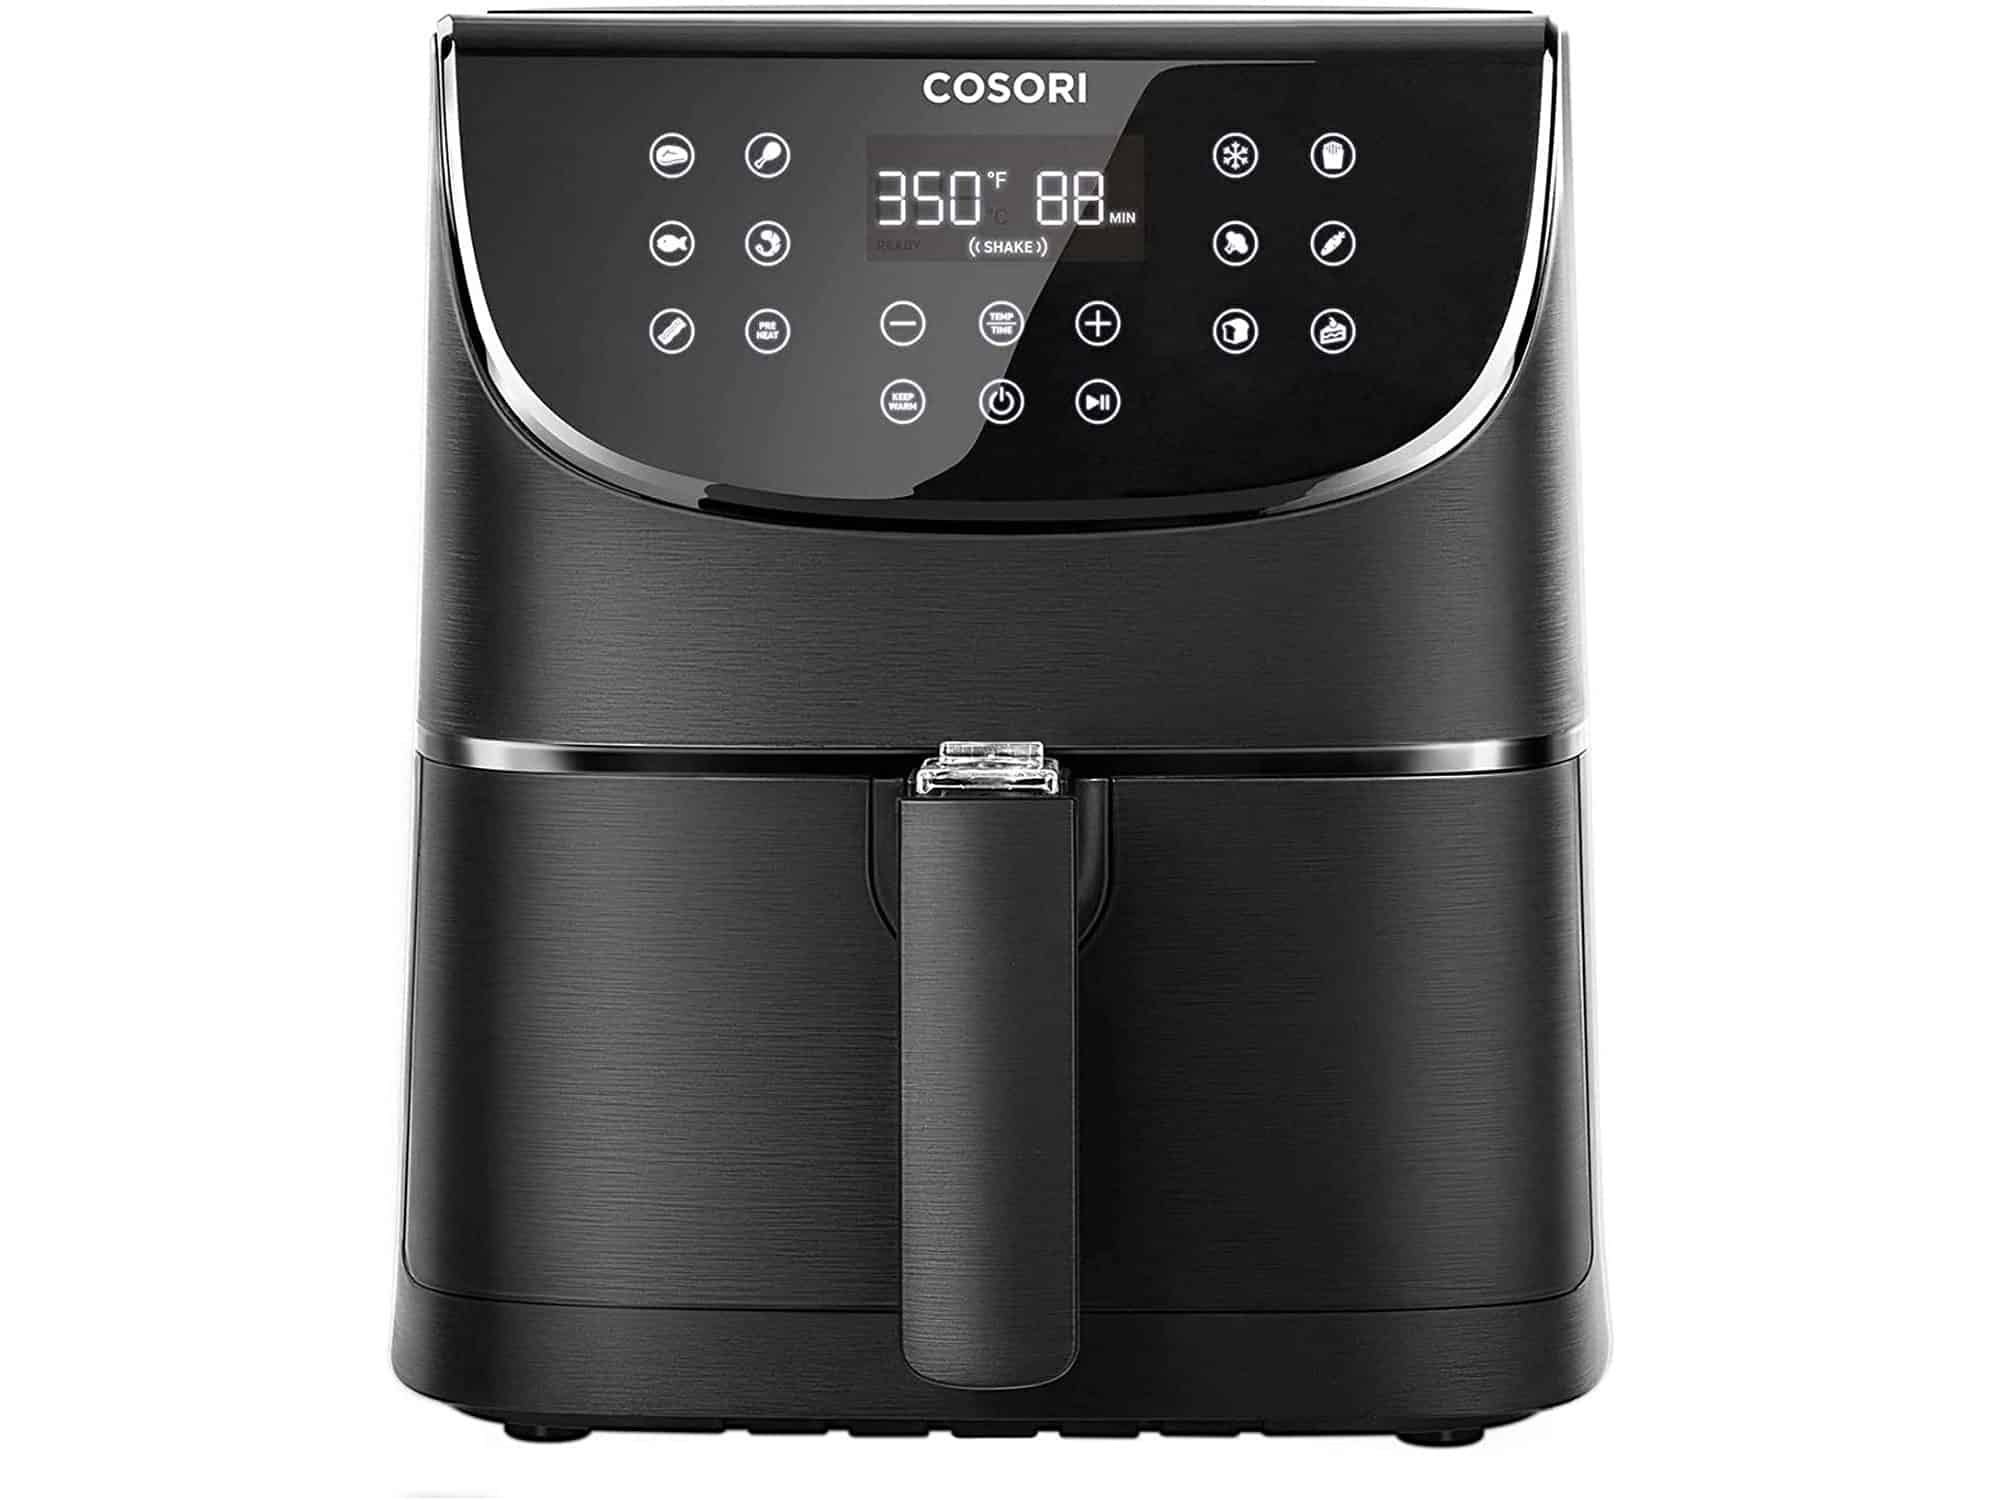 COSORI Air Fryer Max XL (100 Recipes) Electric Hot Oven Oilless Cooker LED Touch Screen with 13 Cooking Functions, Preheat and Shake Reminder, Nonstick Basket, 5.8 QT, DIGITAL-Black